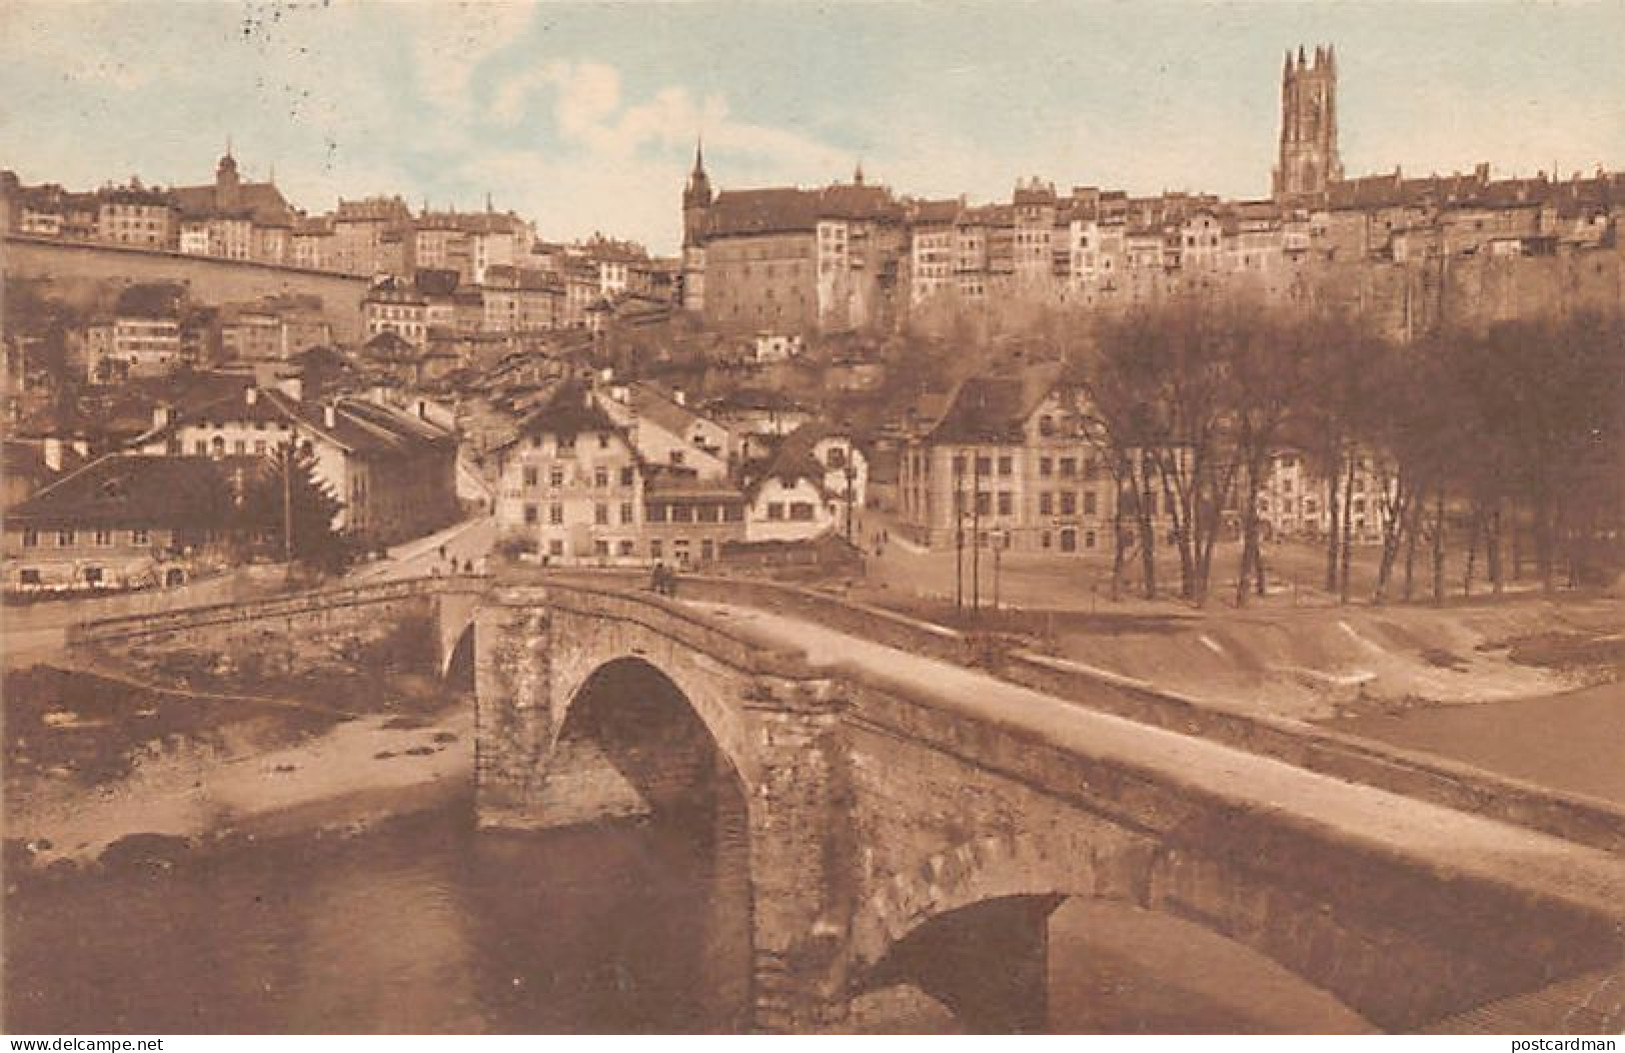 Suisse - Fribourg - Le Pont St-Jean - Ed. S.A. Schnegg & Co 4217 - Fribourg